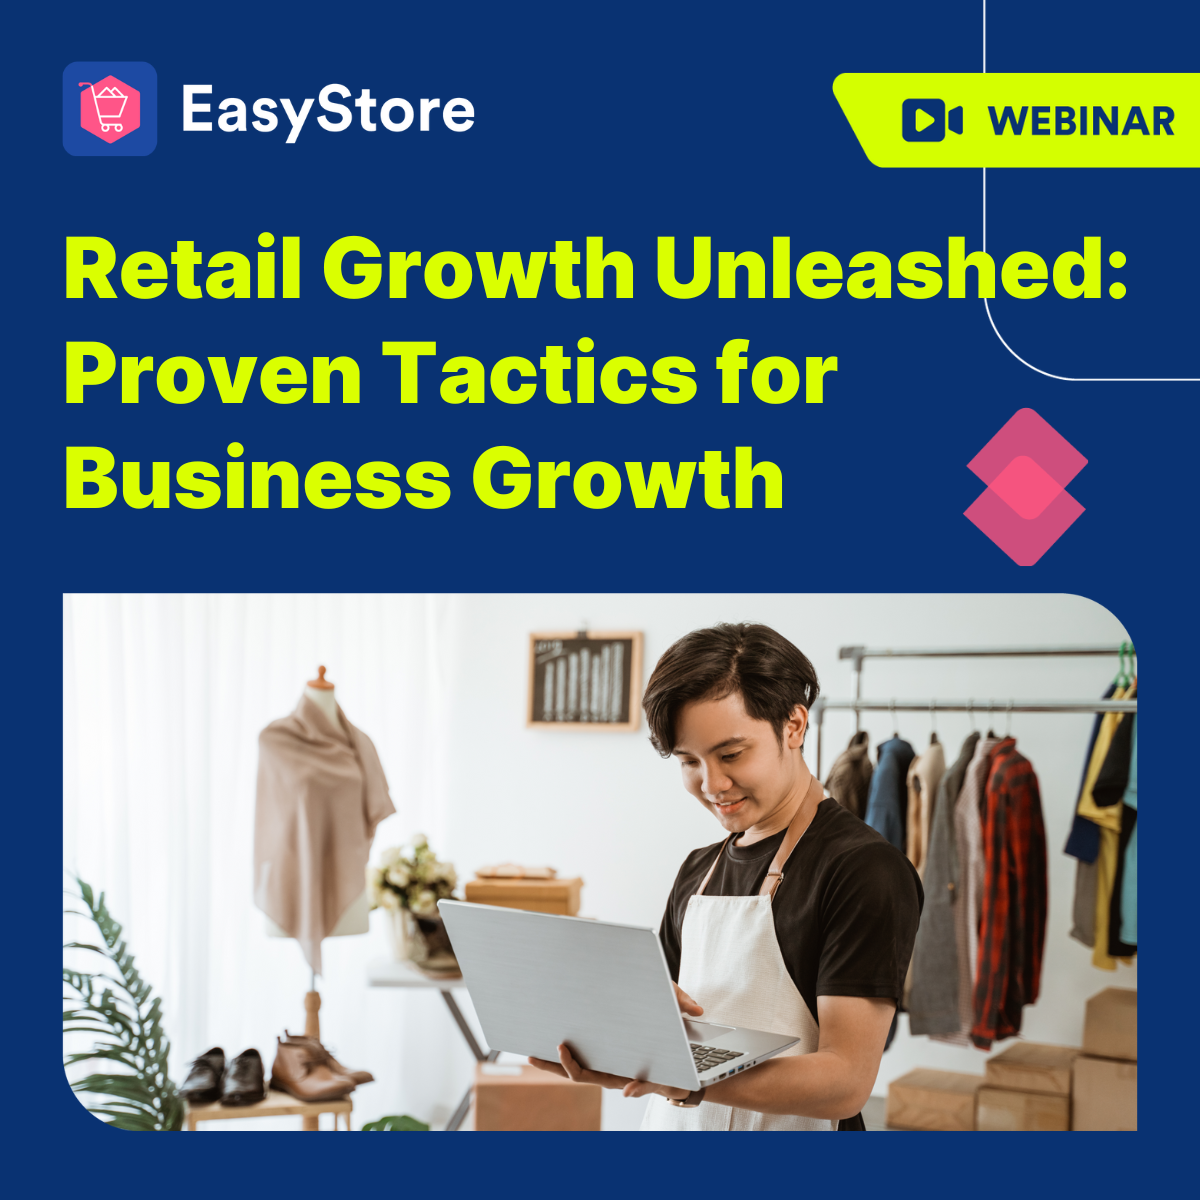 [Webinar] Retail Growth Unleashed: Proven Tactics for Business Growth | EasyStore